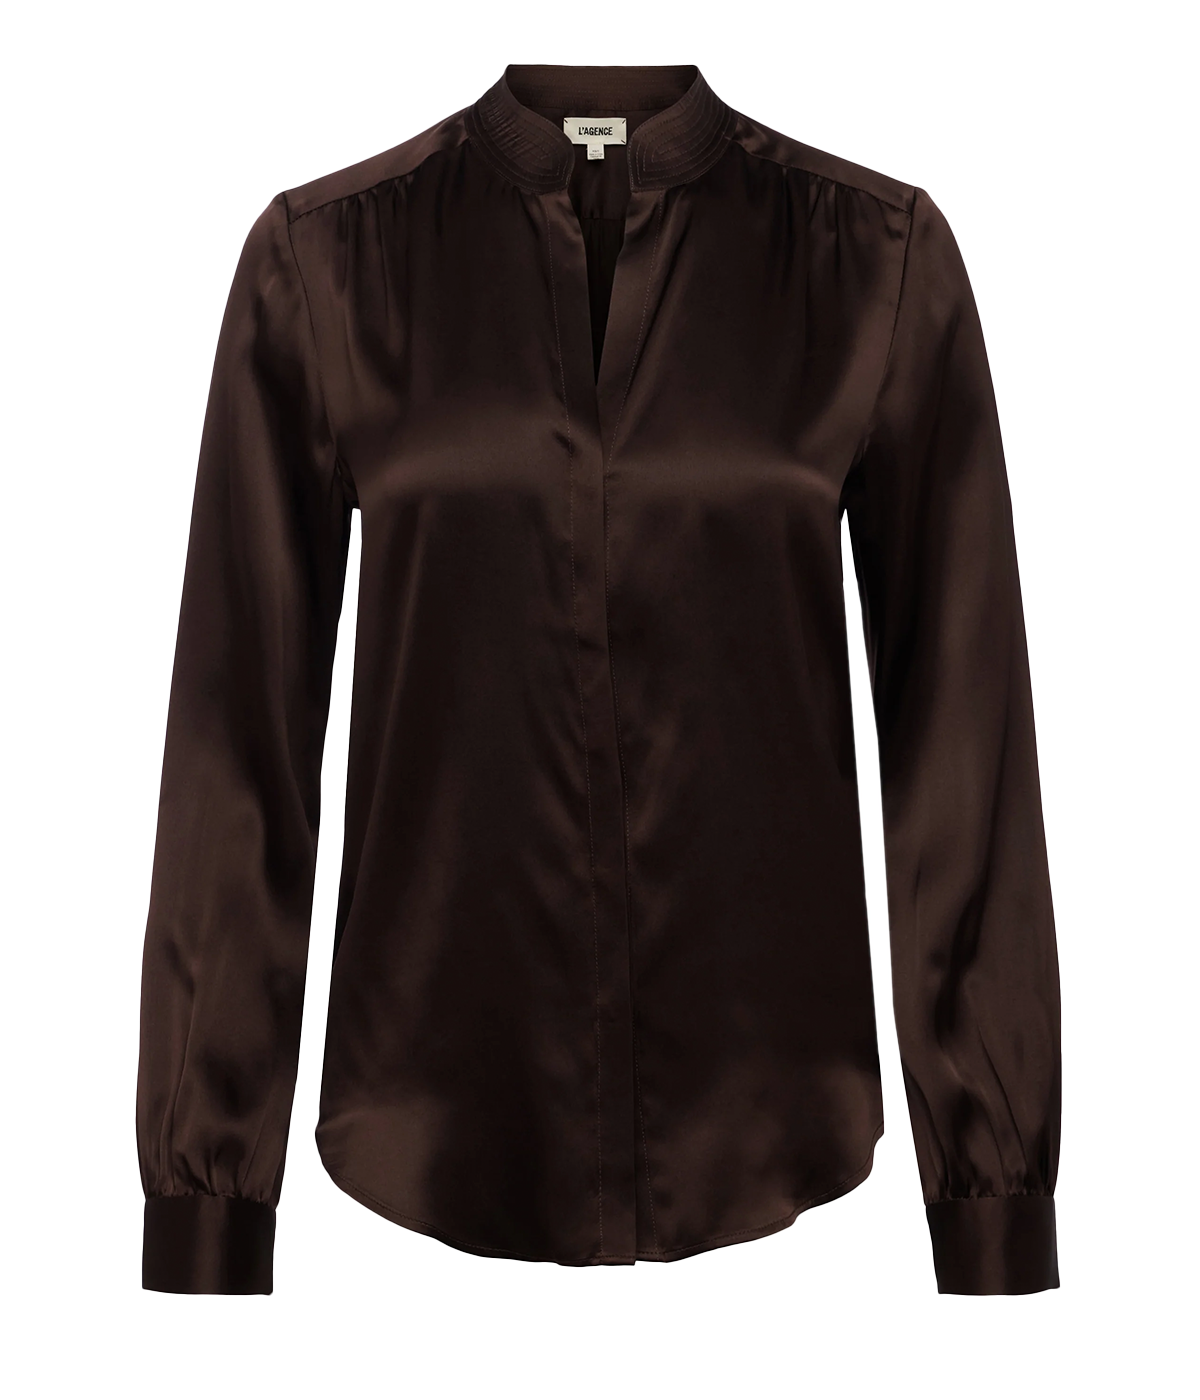 Bianca Long Sleeve Blouse in Chocolate